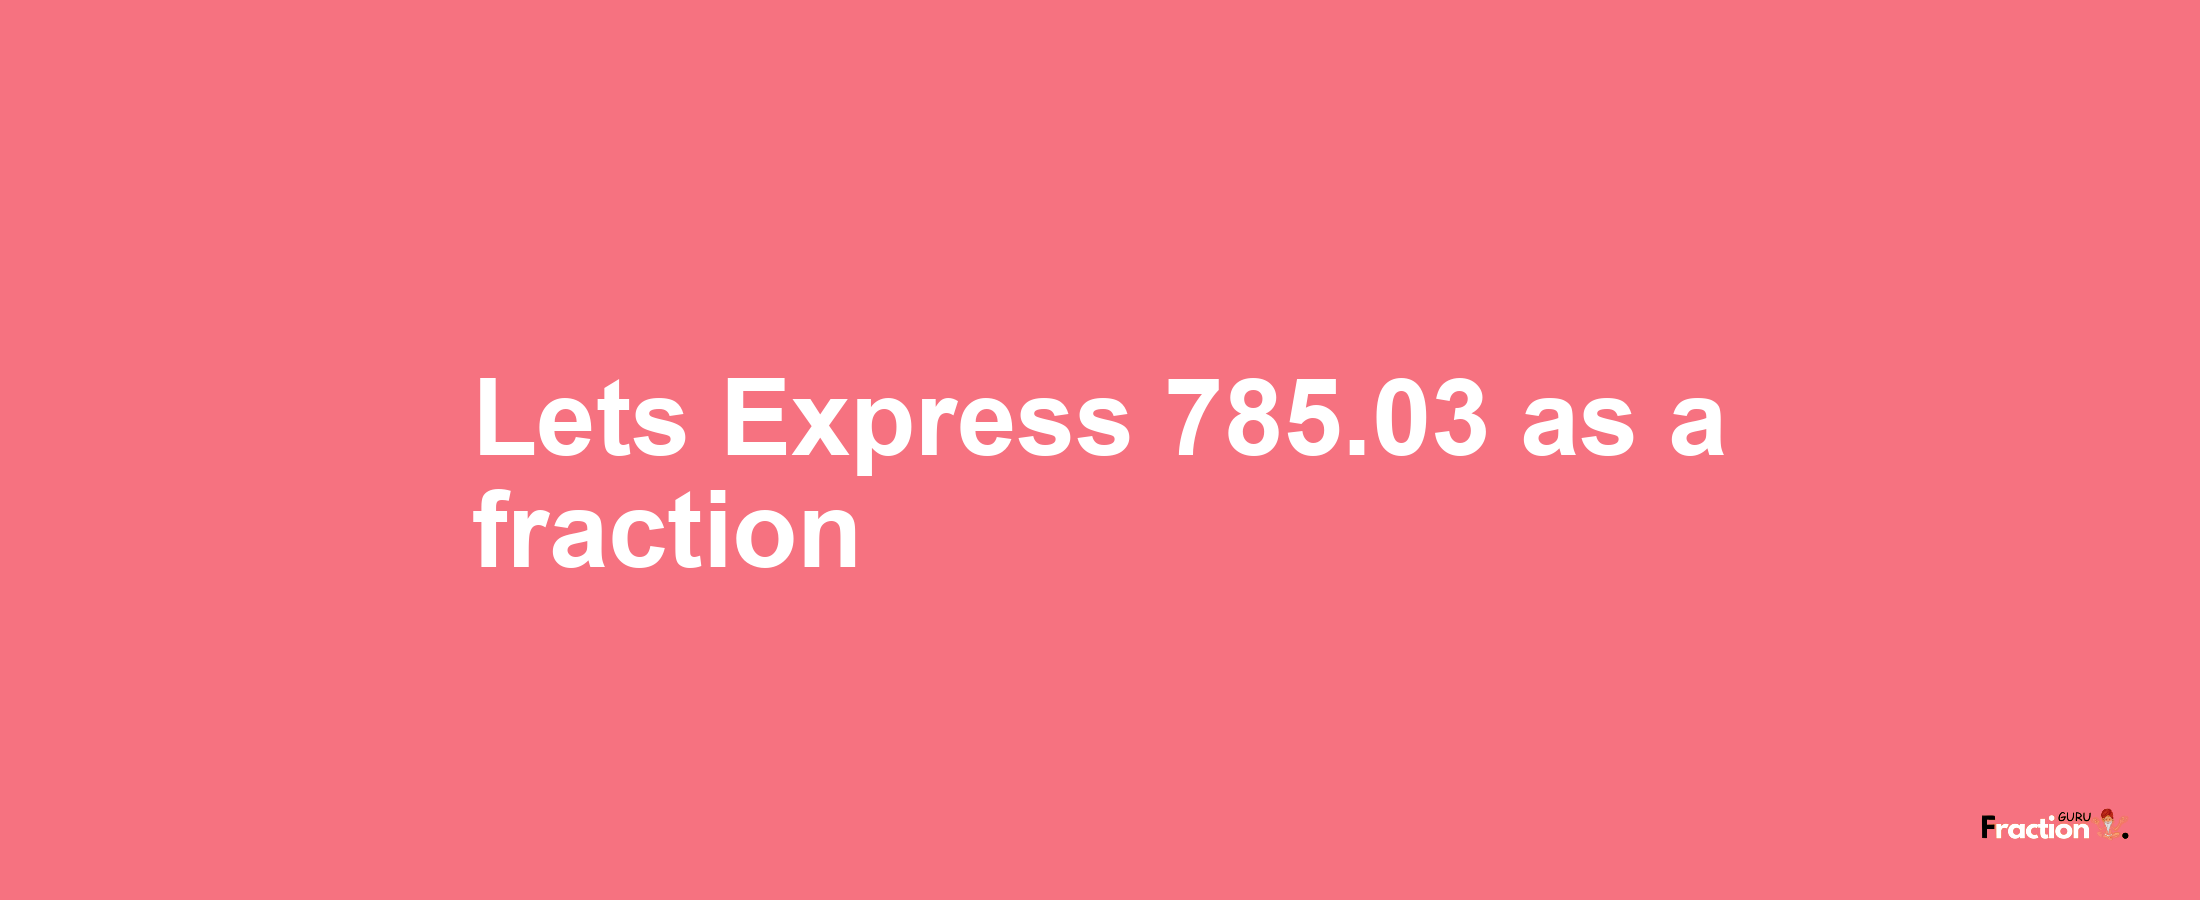 Lets Express 785.03 as afraction